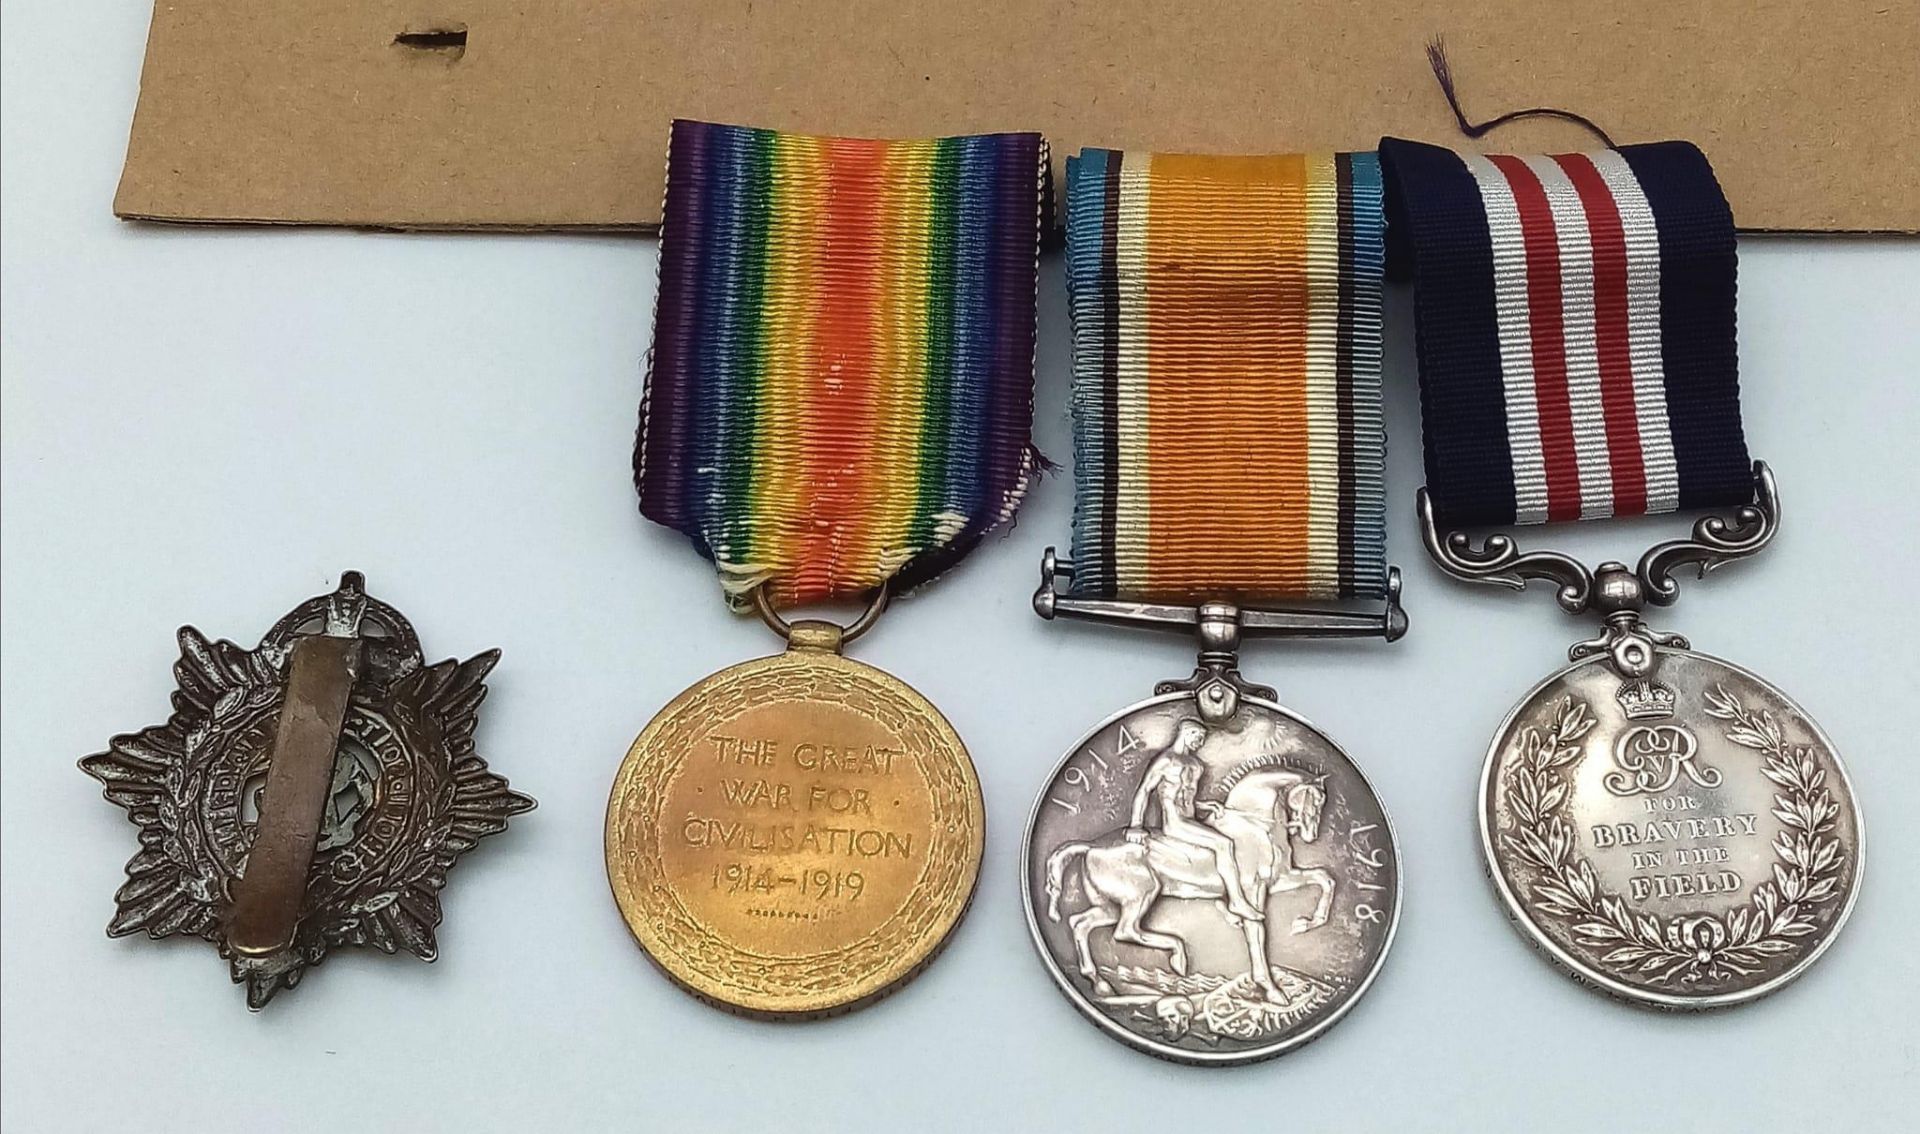 A WW1 Military Medal Group Awarded to DM2.207016 Pte Harry Glover 44 th Motor Ambulance Convoy - Image 4 of 6